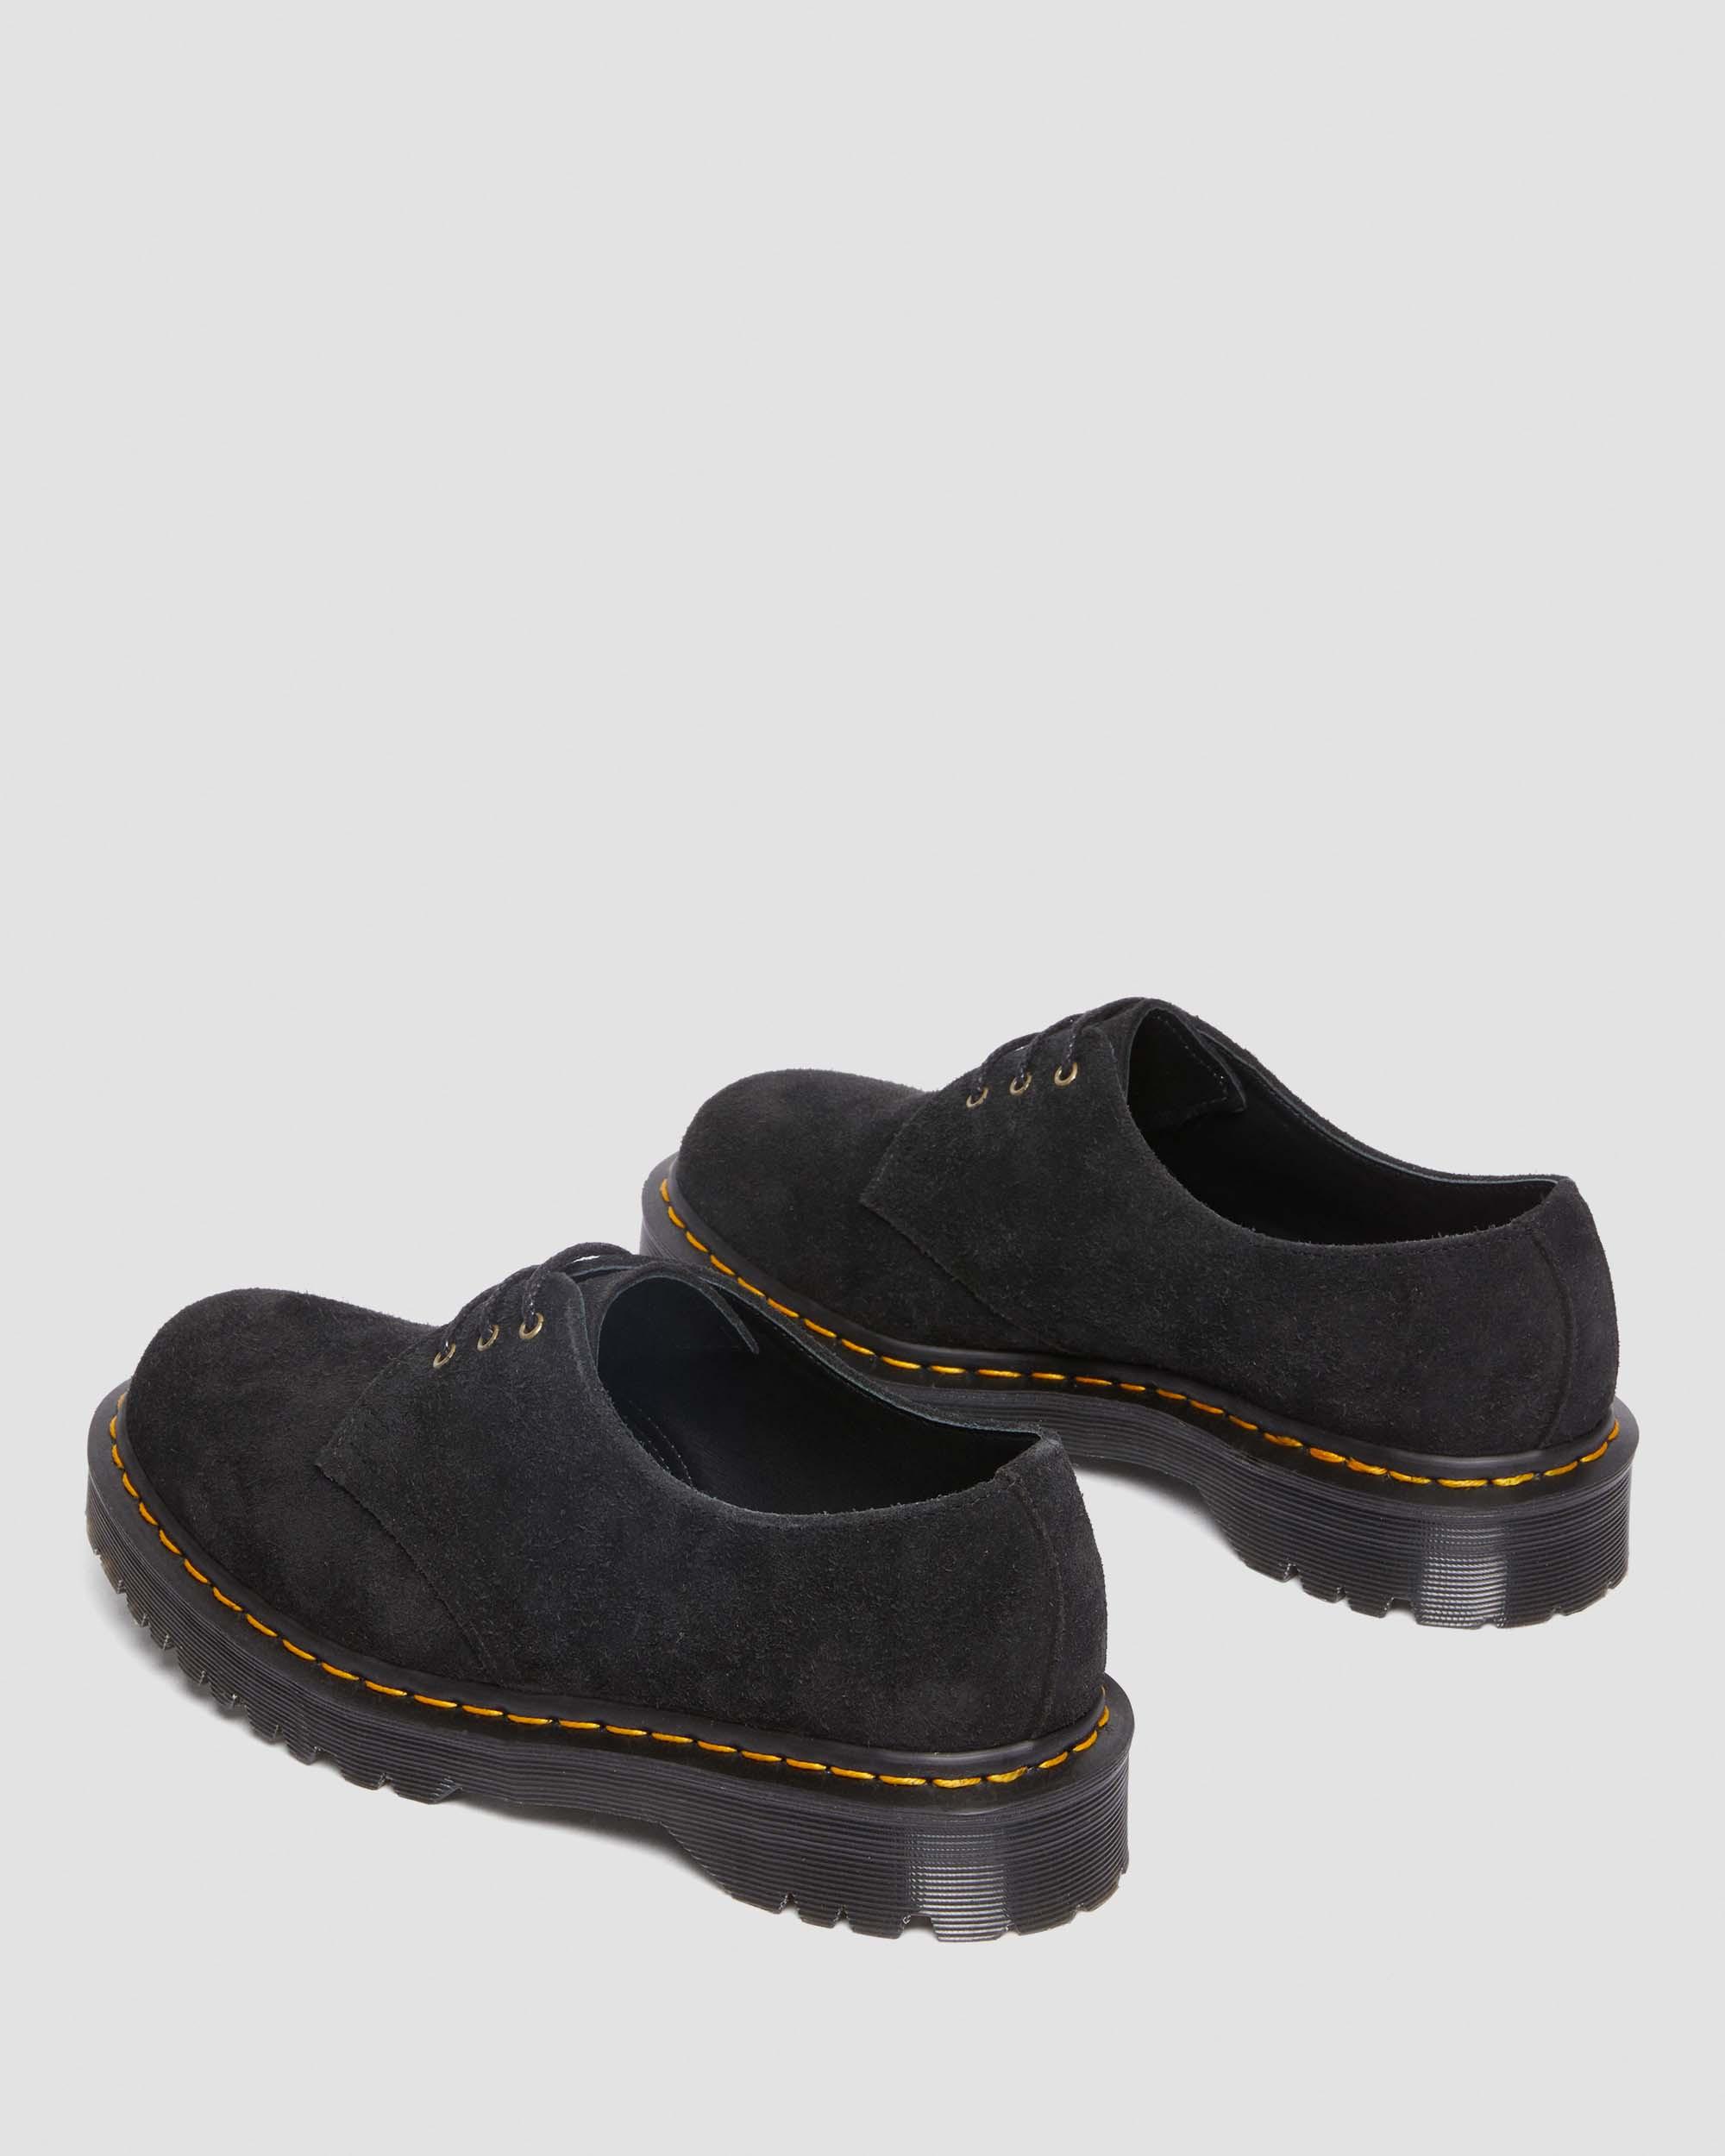 1461 Bex Made In England Tufted Suede Shoes, Black | Dr. Martens